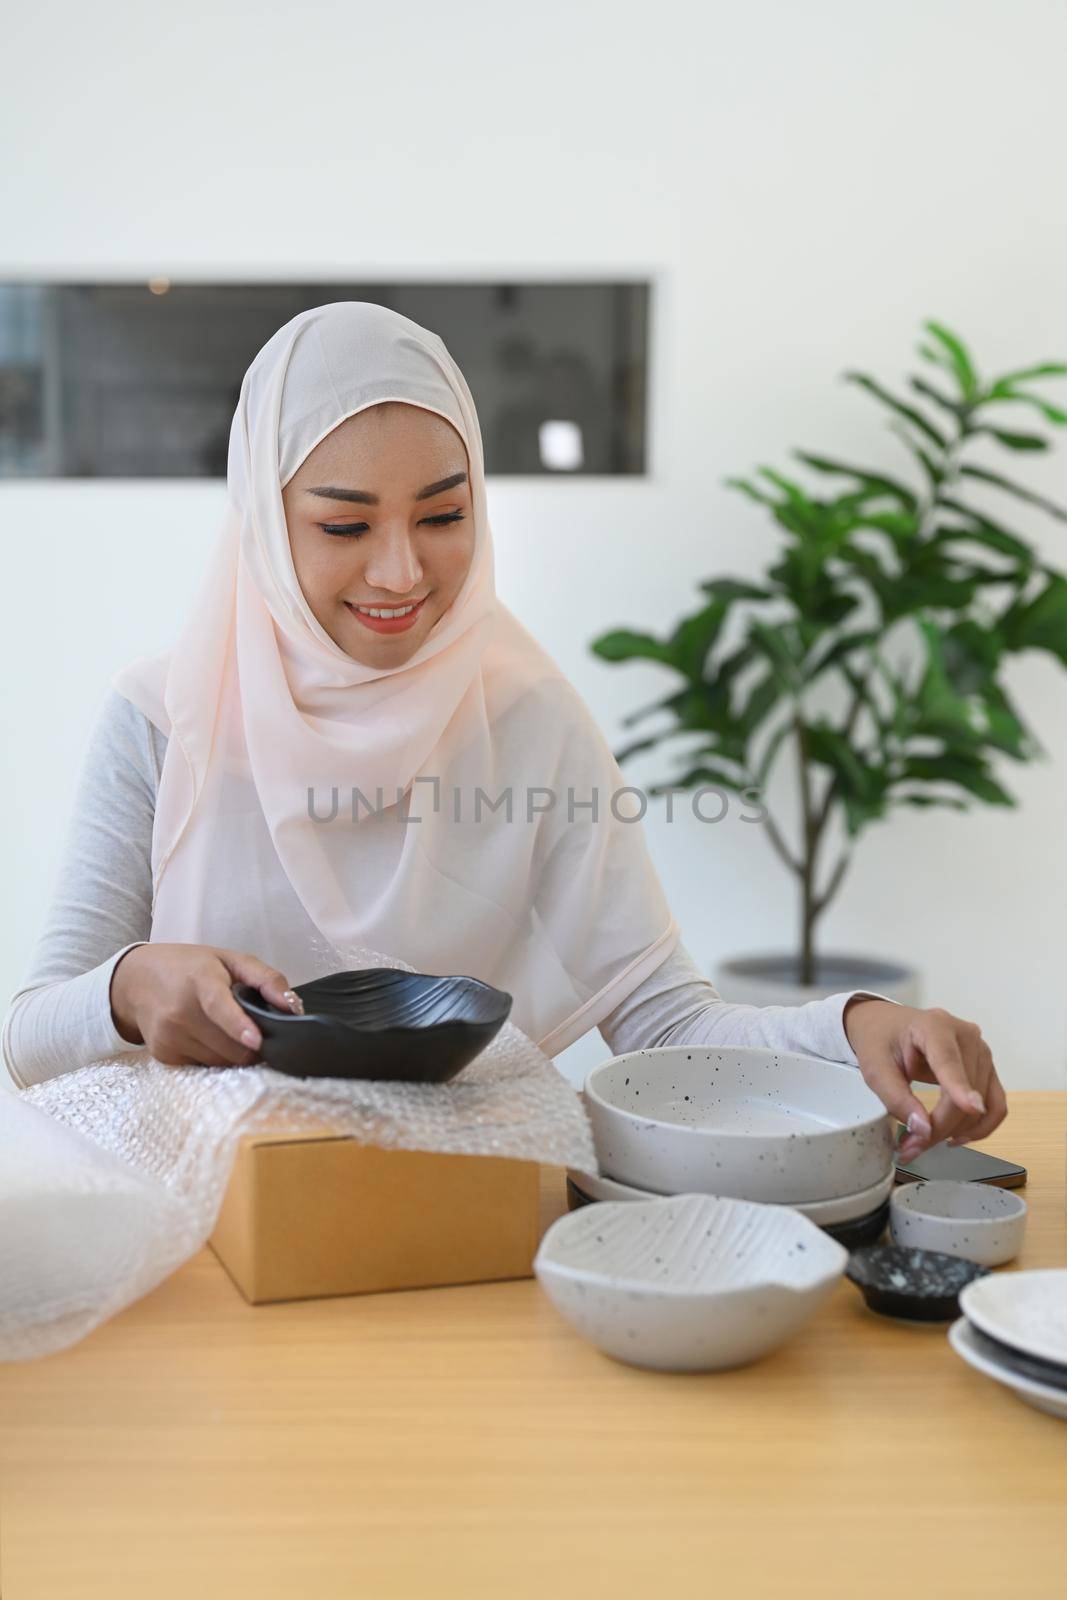 Beautiful Muslim woman online seller packing product in cardboard box for shipping to customers.